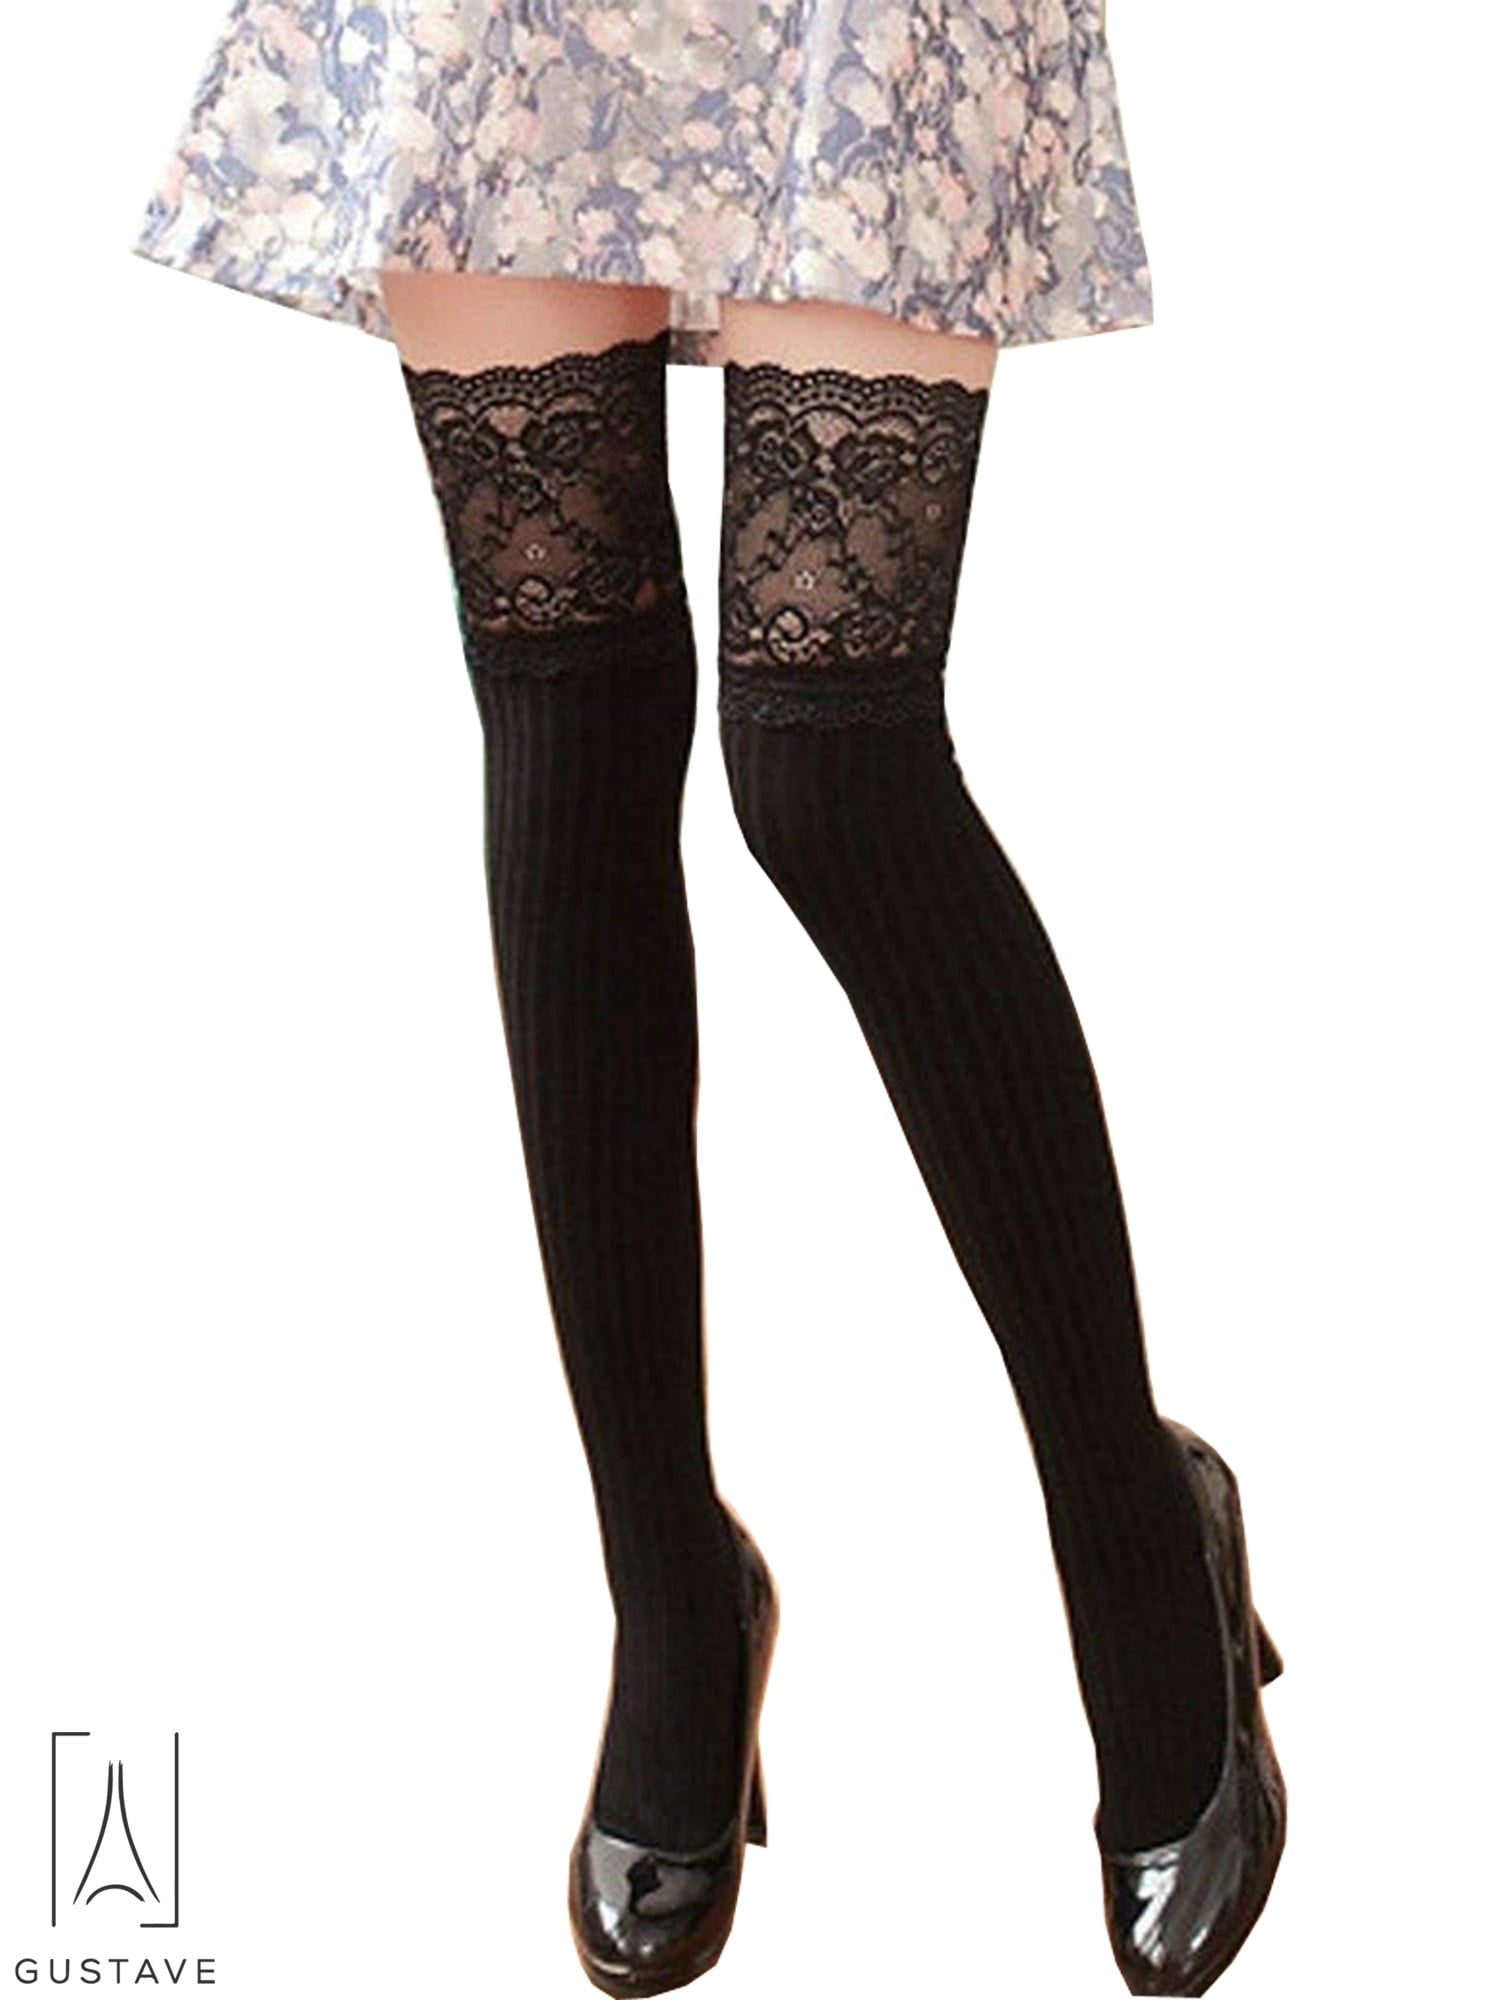 Details about   Women Leg Warmers Over-Knee Thigh High Knitted Crochet Long Socks Soft Stockings